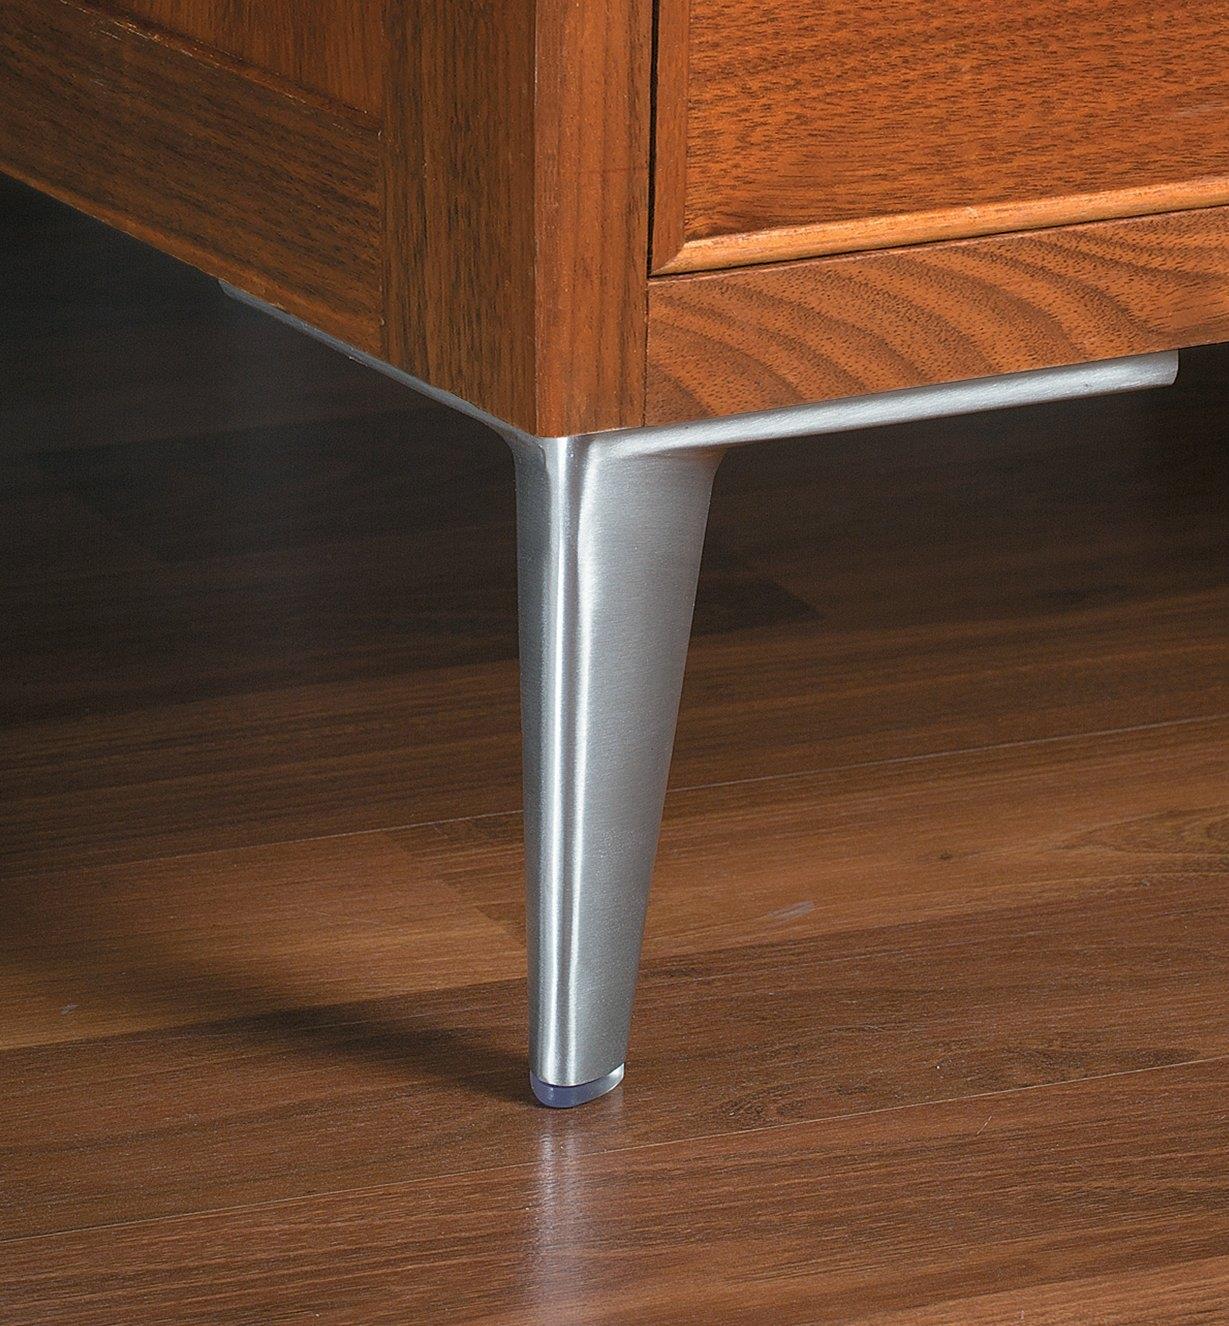 Example of Aluminum Corner Leg supporting a furniture piece